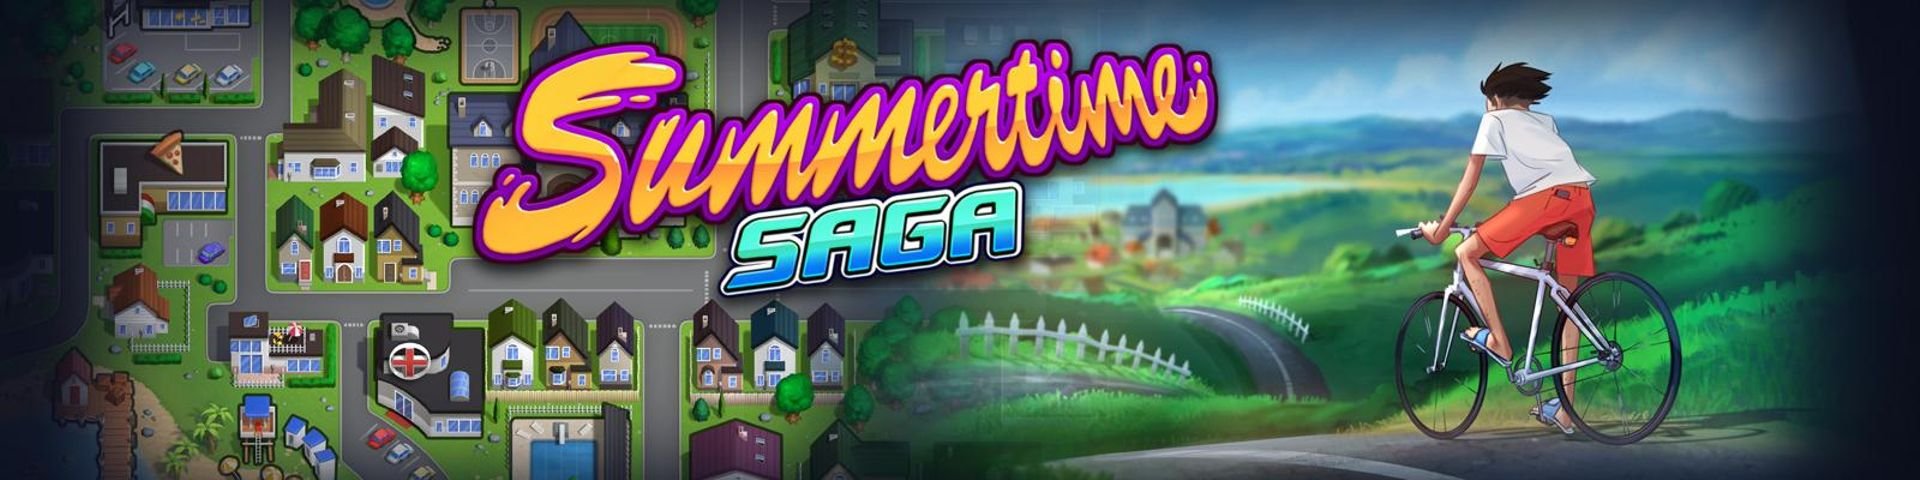 Off topic, but I think this sub would really dig Summertime Saga